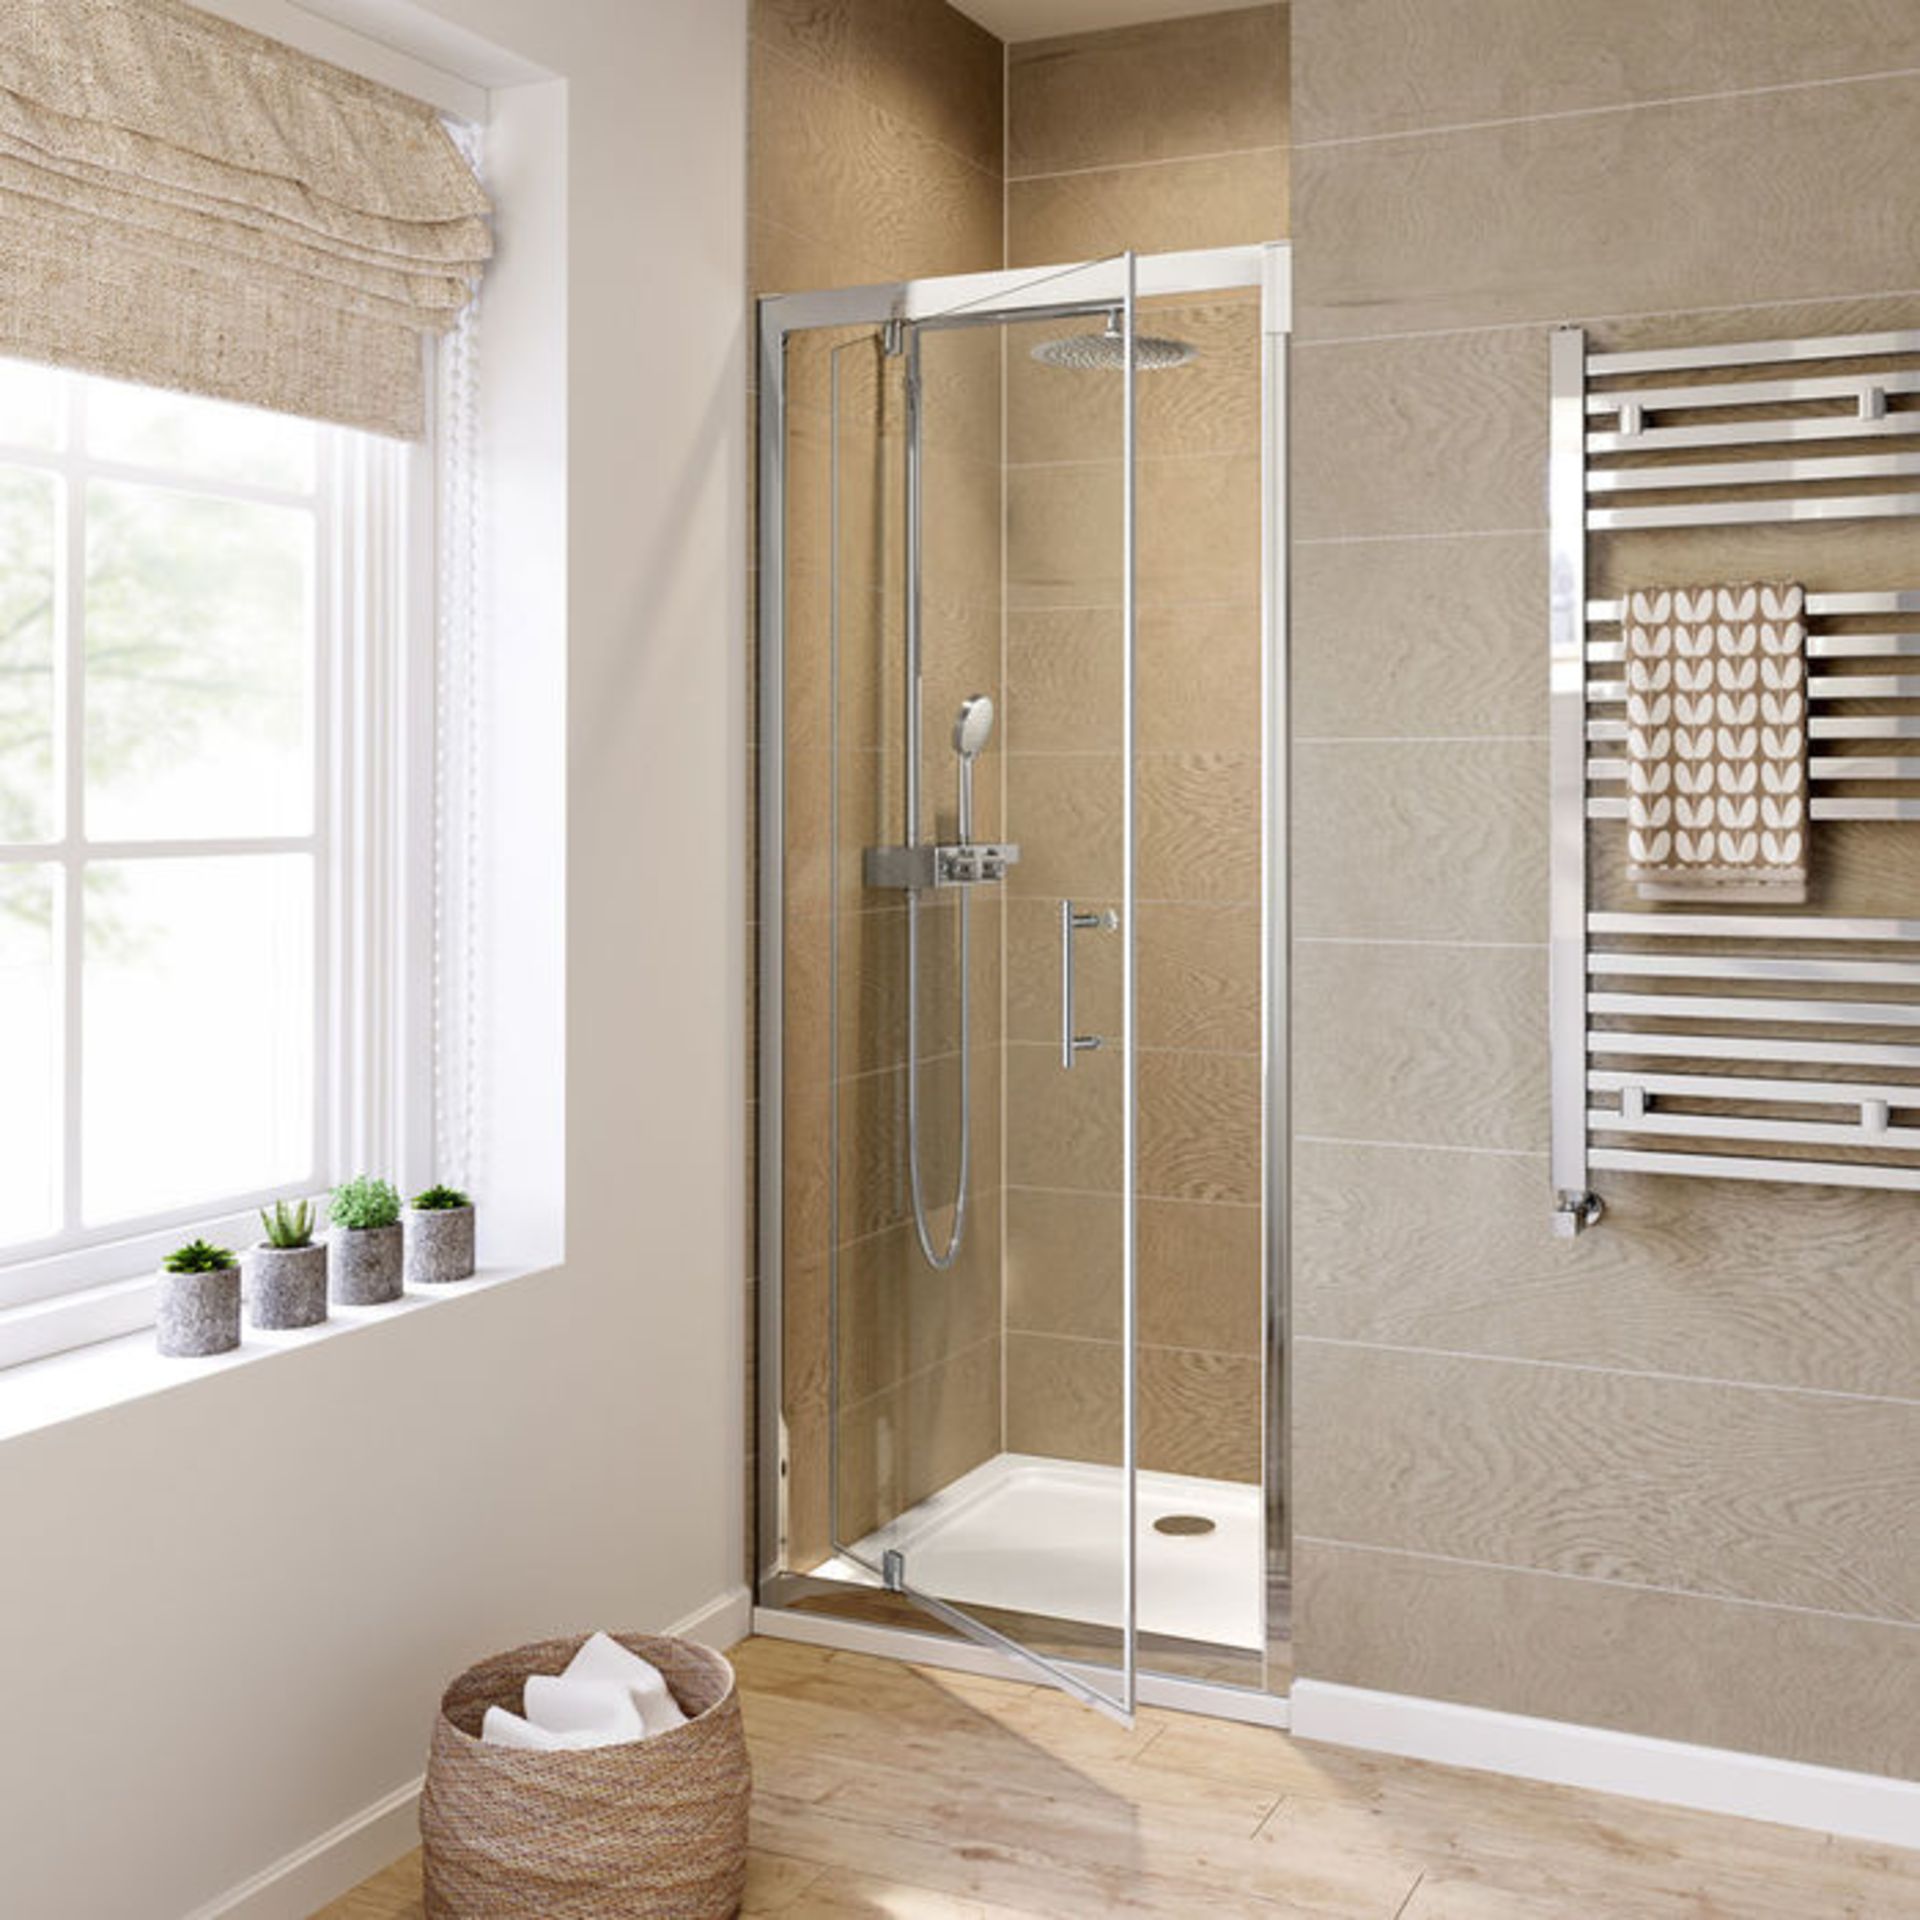 Brand New Twyfords 700mm - 6mm - Premium Pivot Shower Door. RRP £299.99. 8mm Safety Glass Fully wate - Image 2 of 3